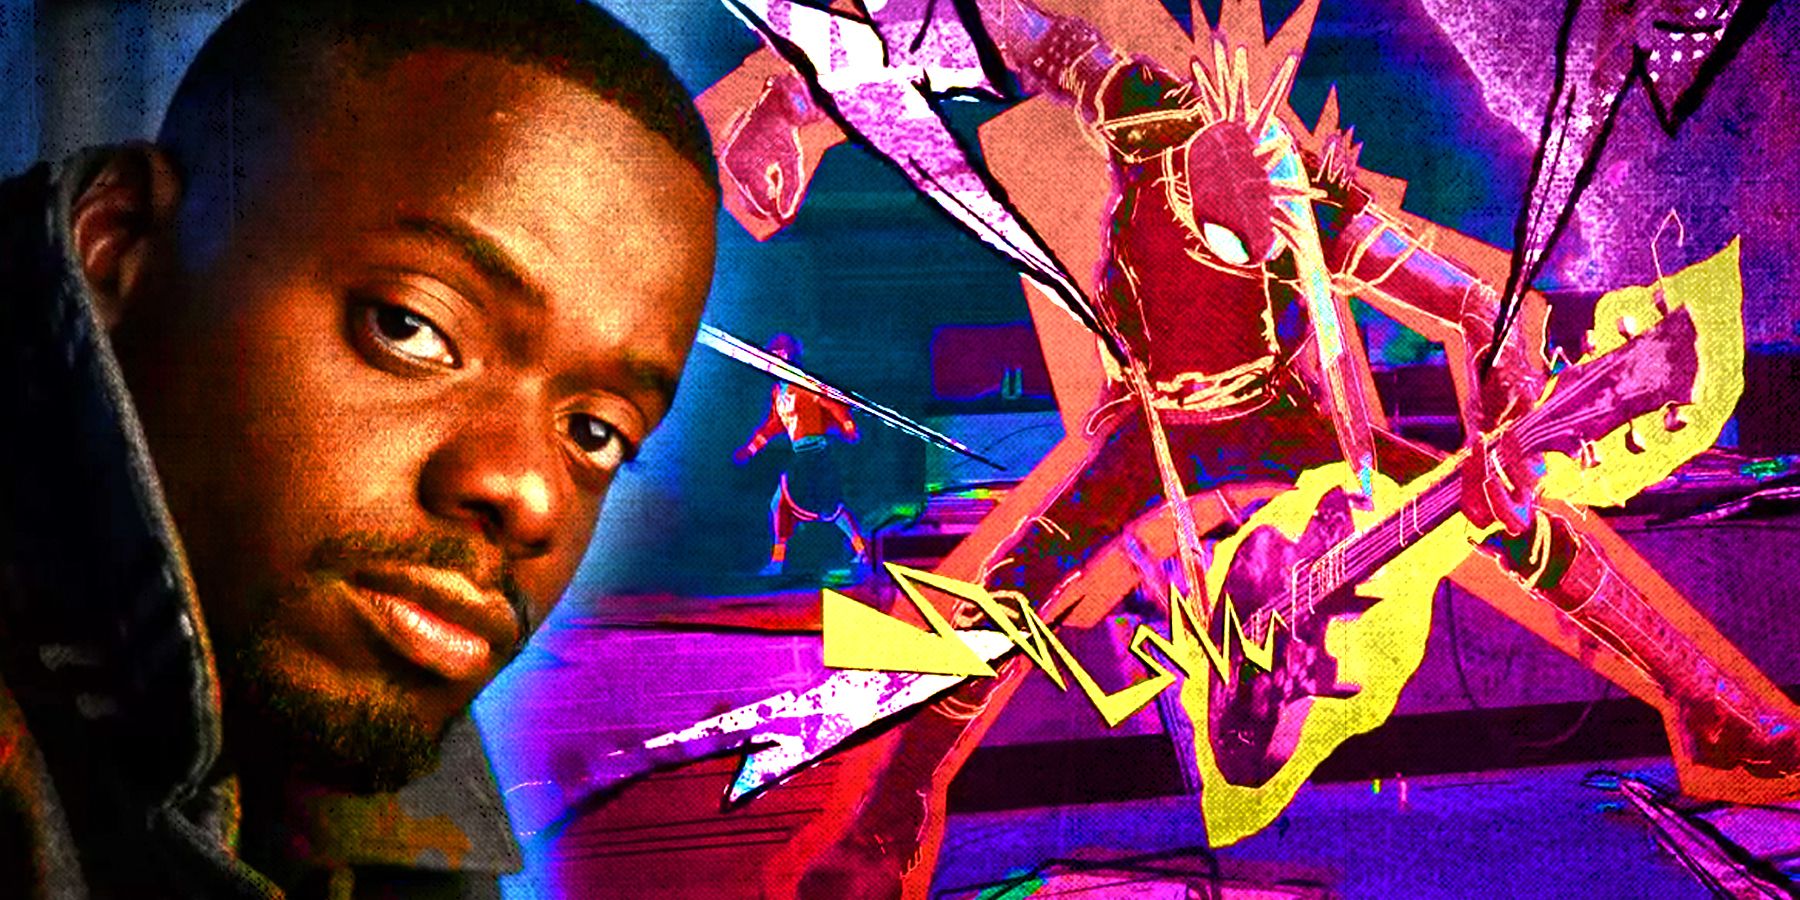 Daniel Kaluuya and Across the Spider-Verse's Spider-Punk playing guitar